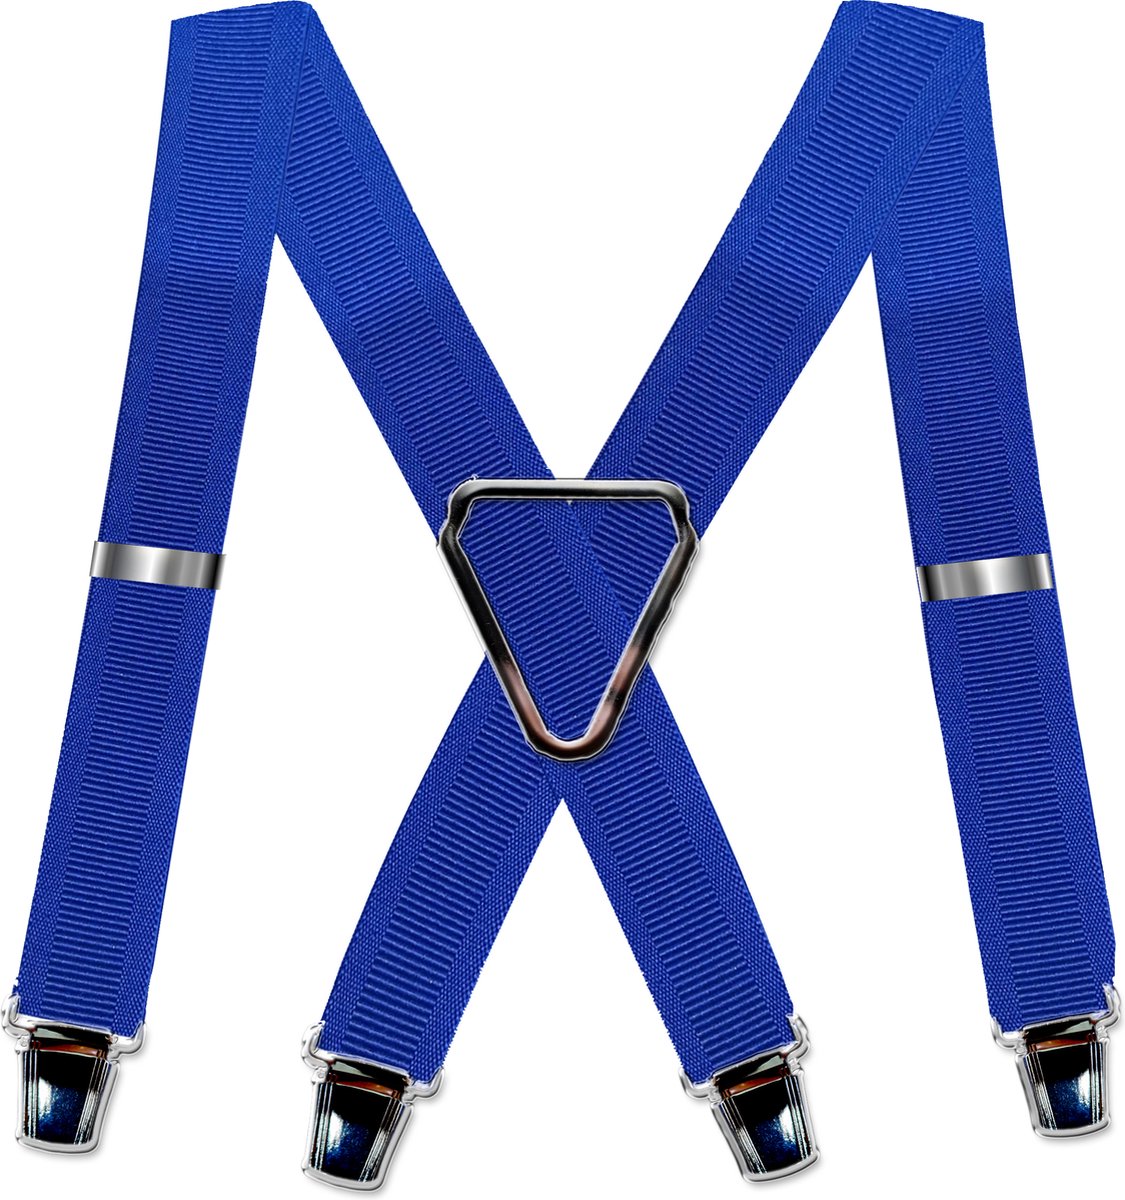 4-point suspenders 'Striped' with wide extra strong sturdy clips Royal Blue